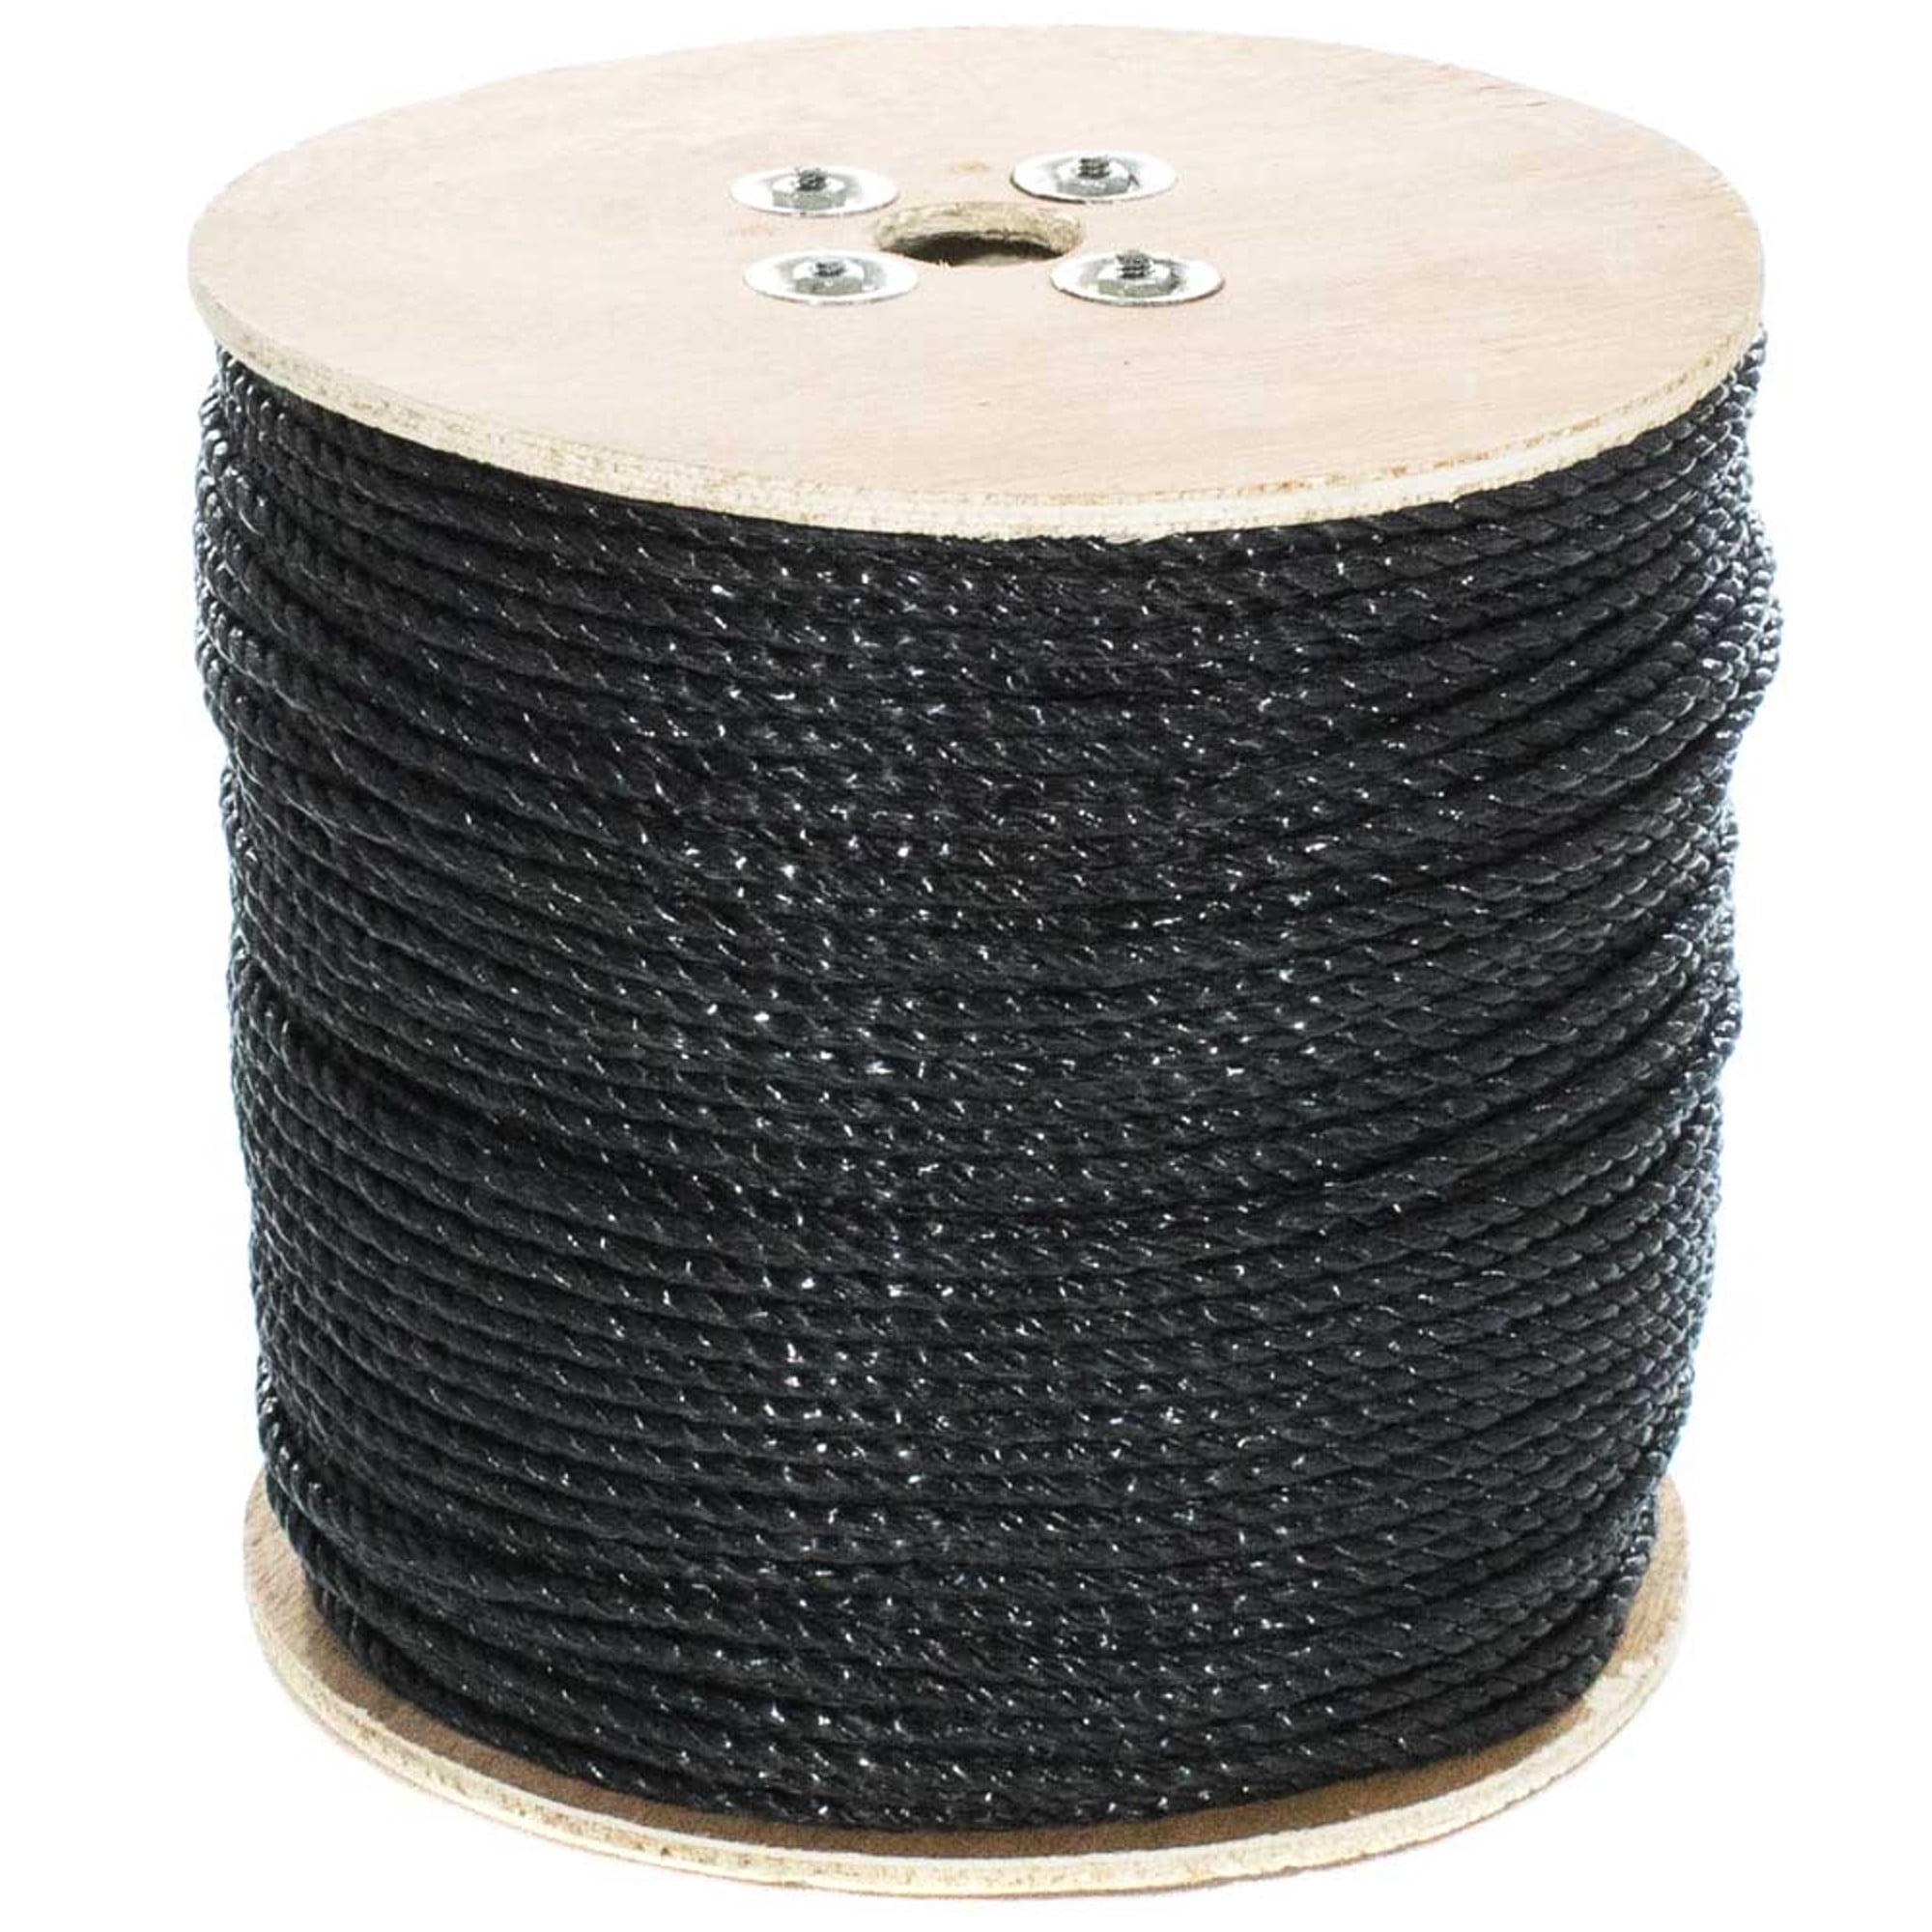 hollow/flat braid polyester rope .Black/Tan.US Made 7/8" x 100 ft 